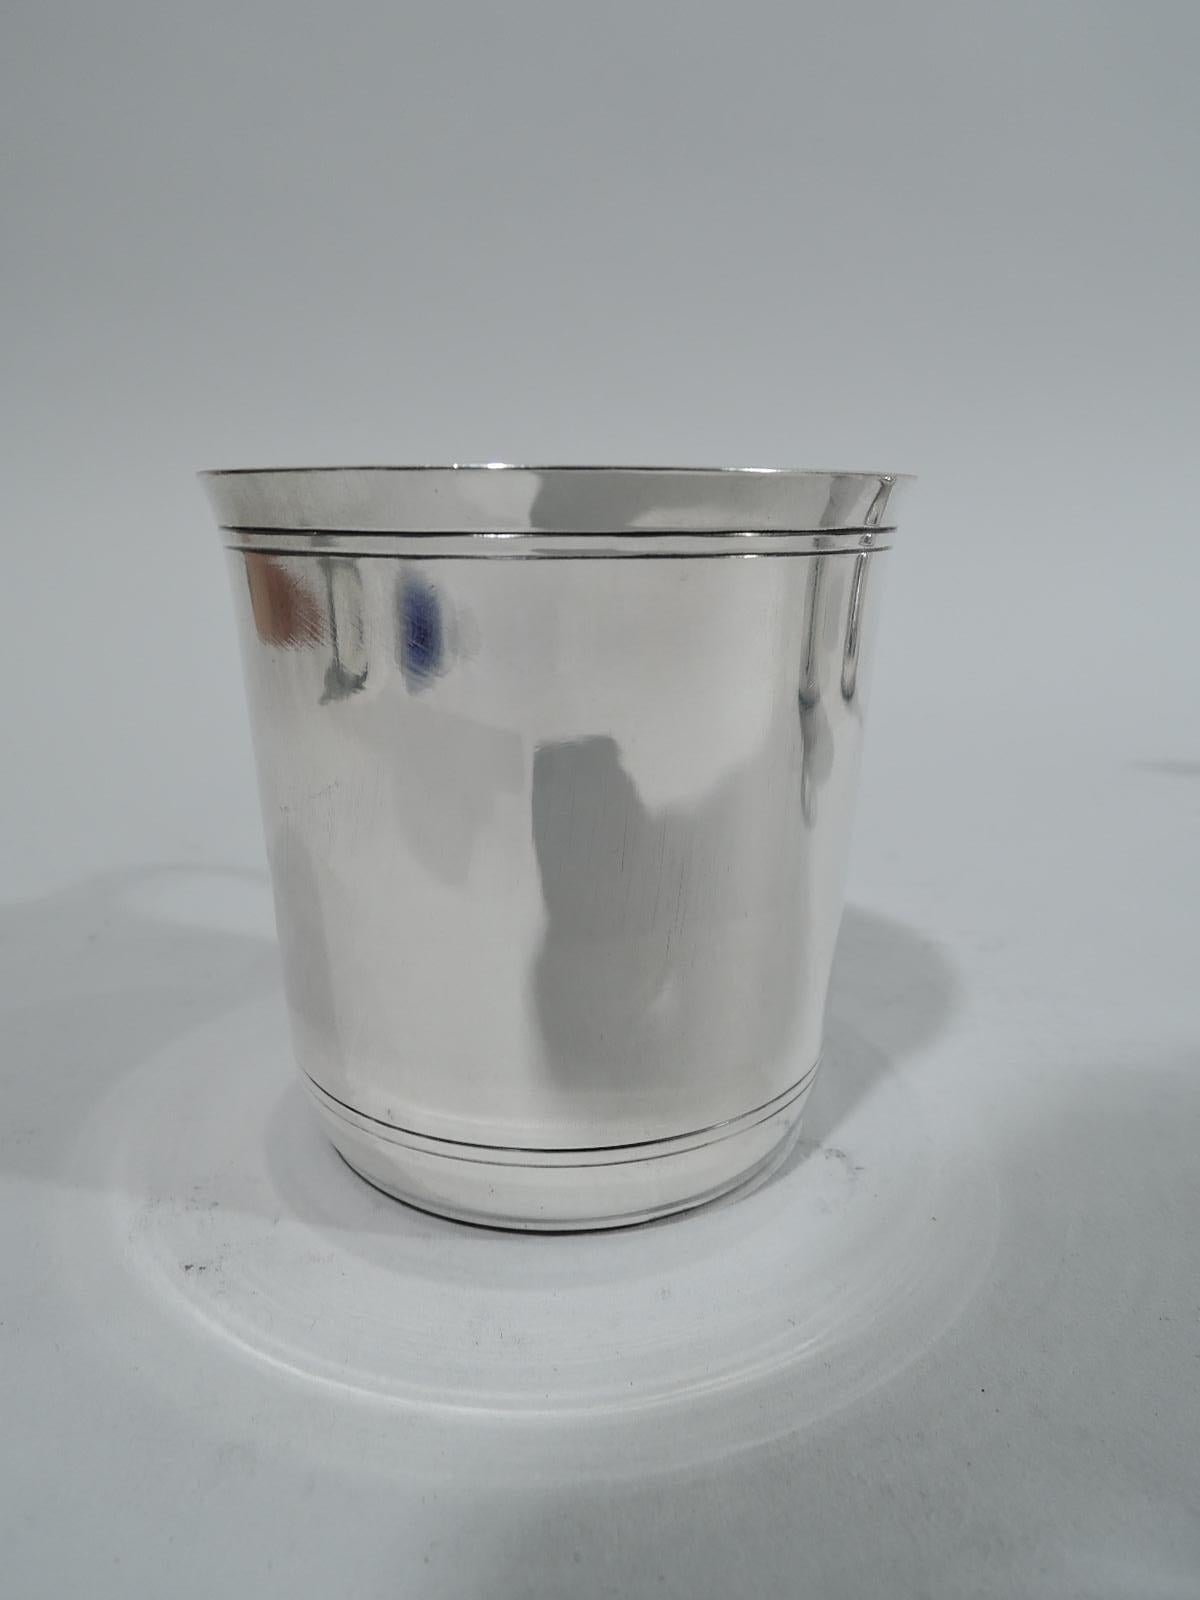 Art Deco sterling silver baby cup. Made by Tiffany & Co. in New York, circa 1941. Straight sides with flared rim and scroll bracket handle. Engraved double line borders at top and bottom leave plenty of room for a big-hearted presentation. Fully